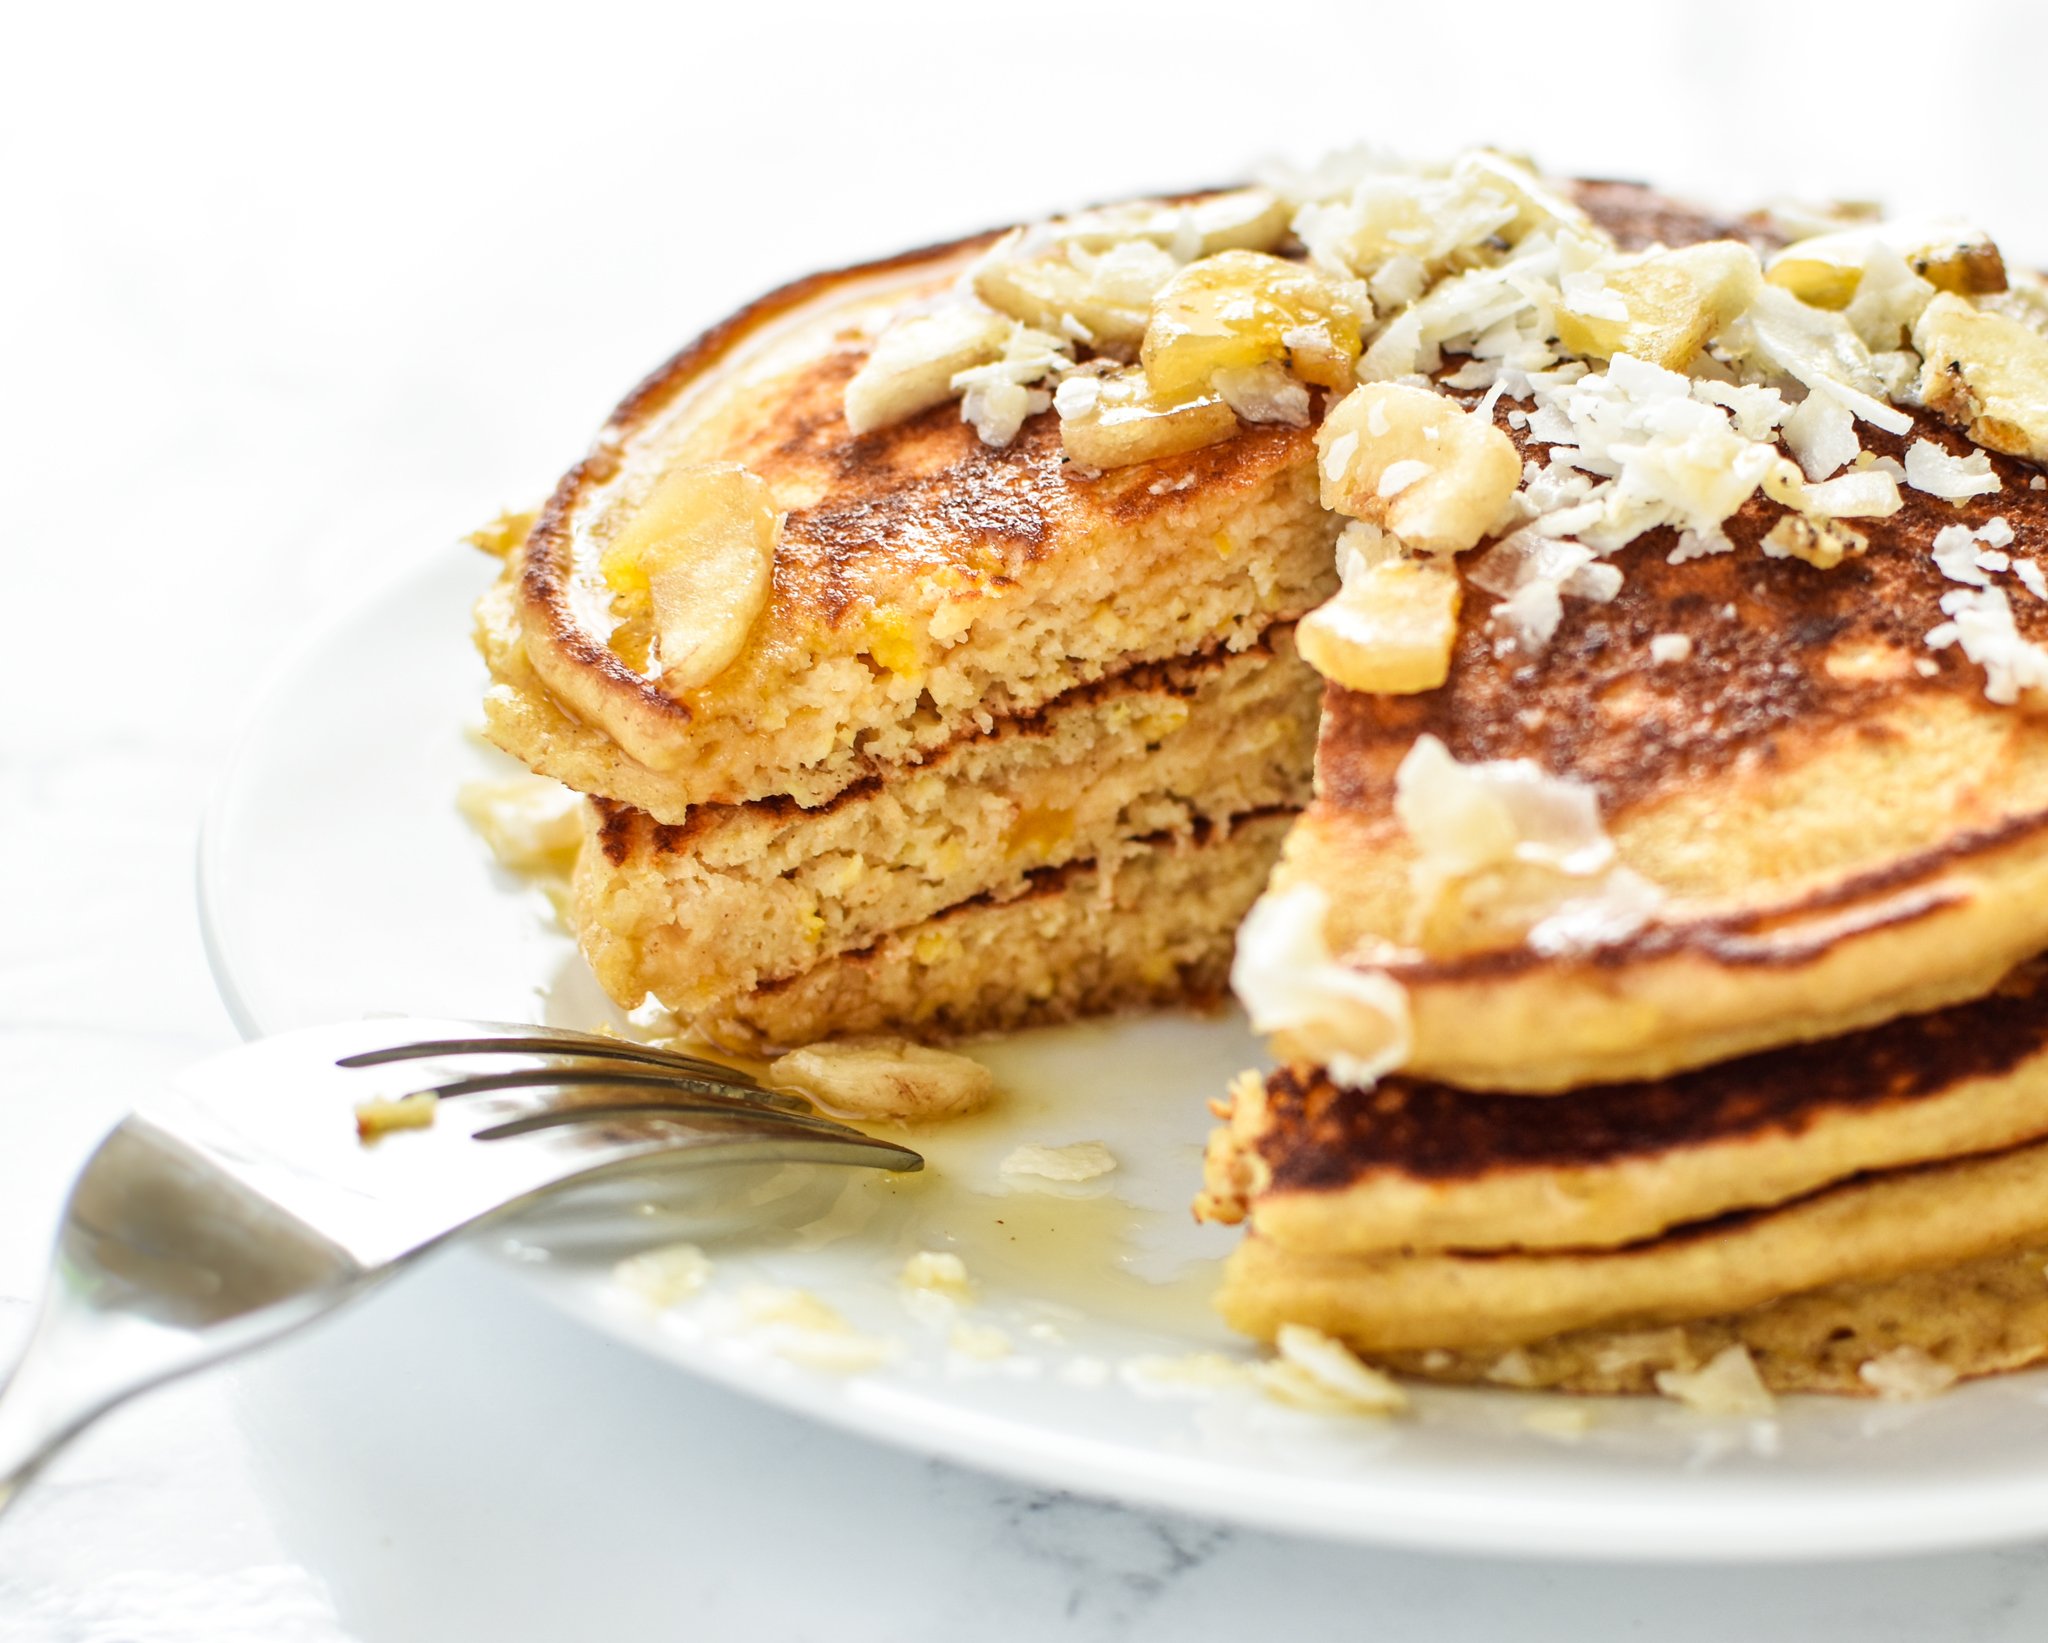 Tropical Pineapple Protein Pancakes Recipe - A perfect blend of pineapple helps keep these delicious protein pancakes moist and perfect for on-the-go! - ProjectMealPlan.com